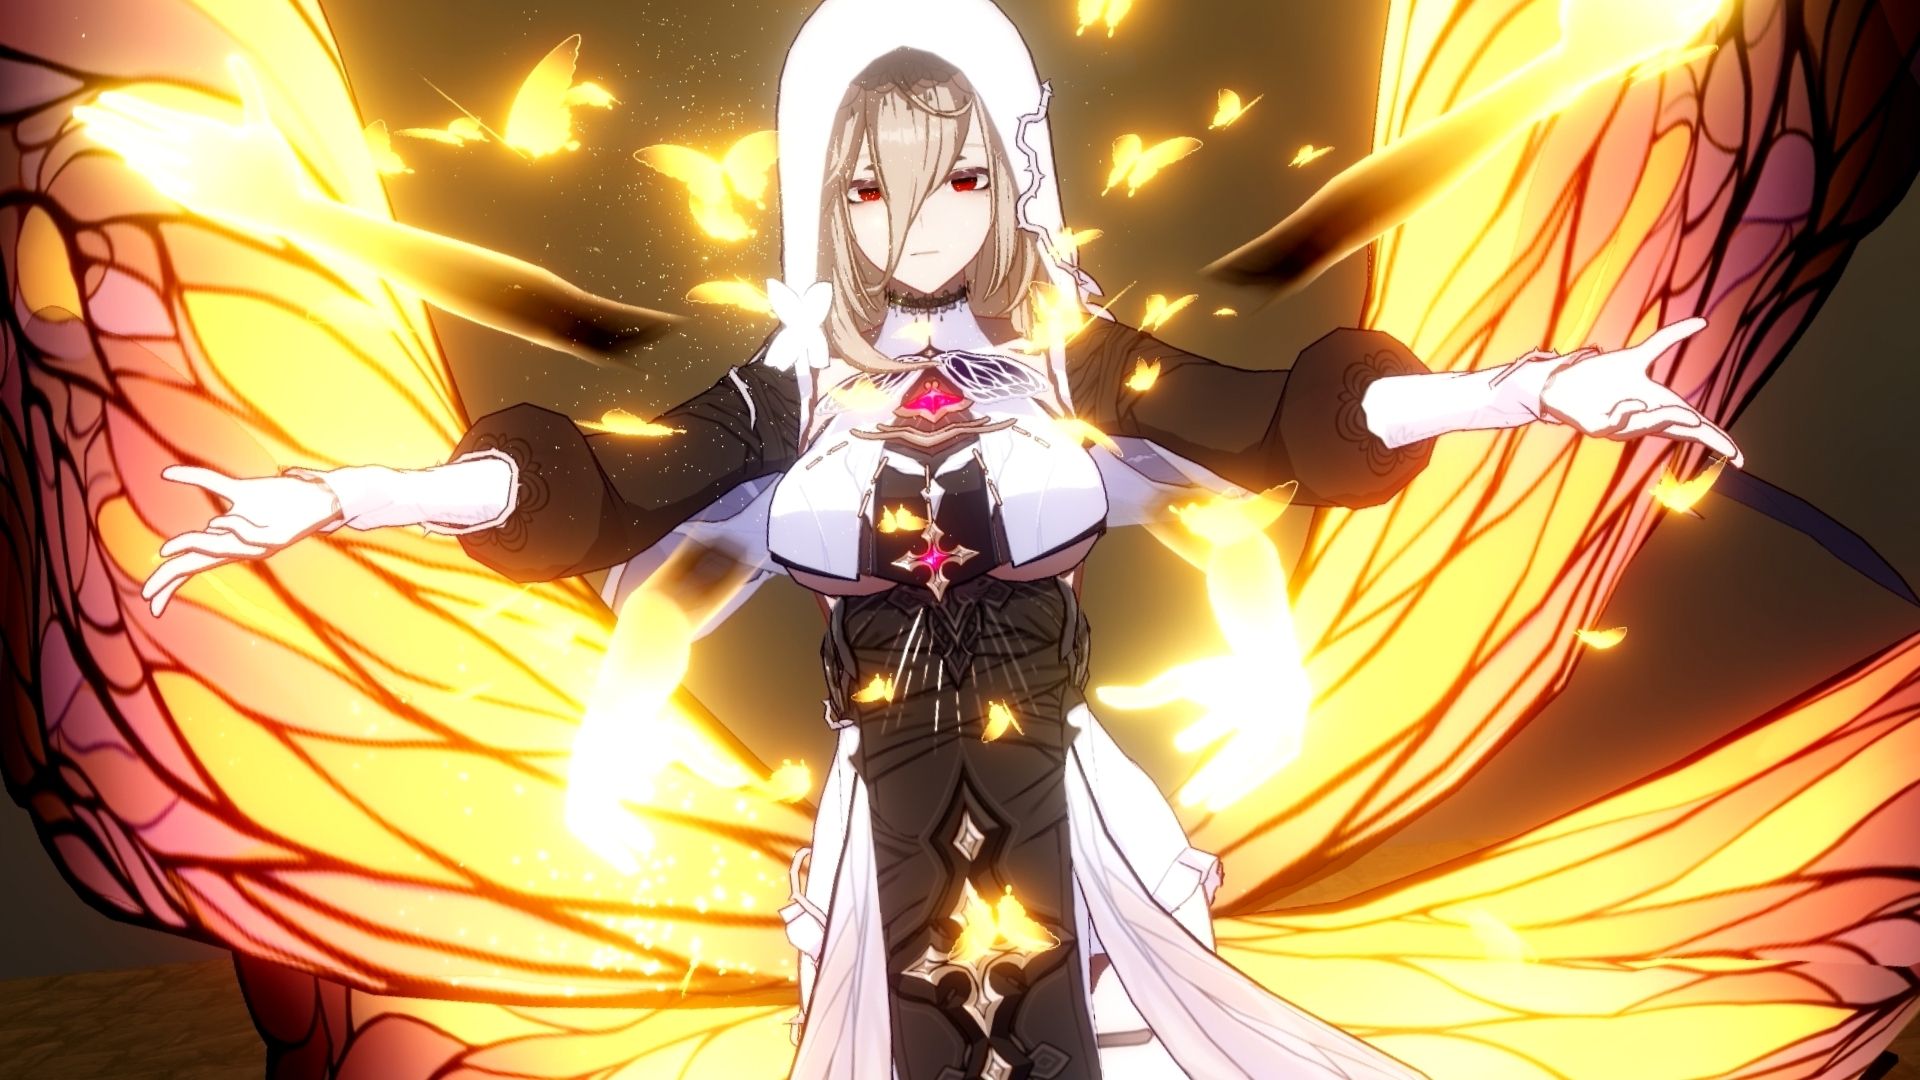 Two new characters join Honkai Impact in update 5.7